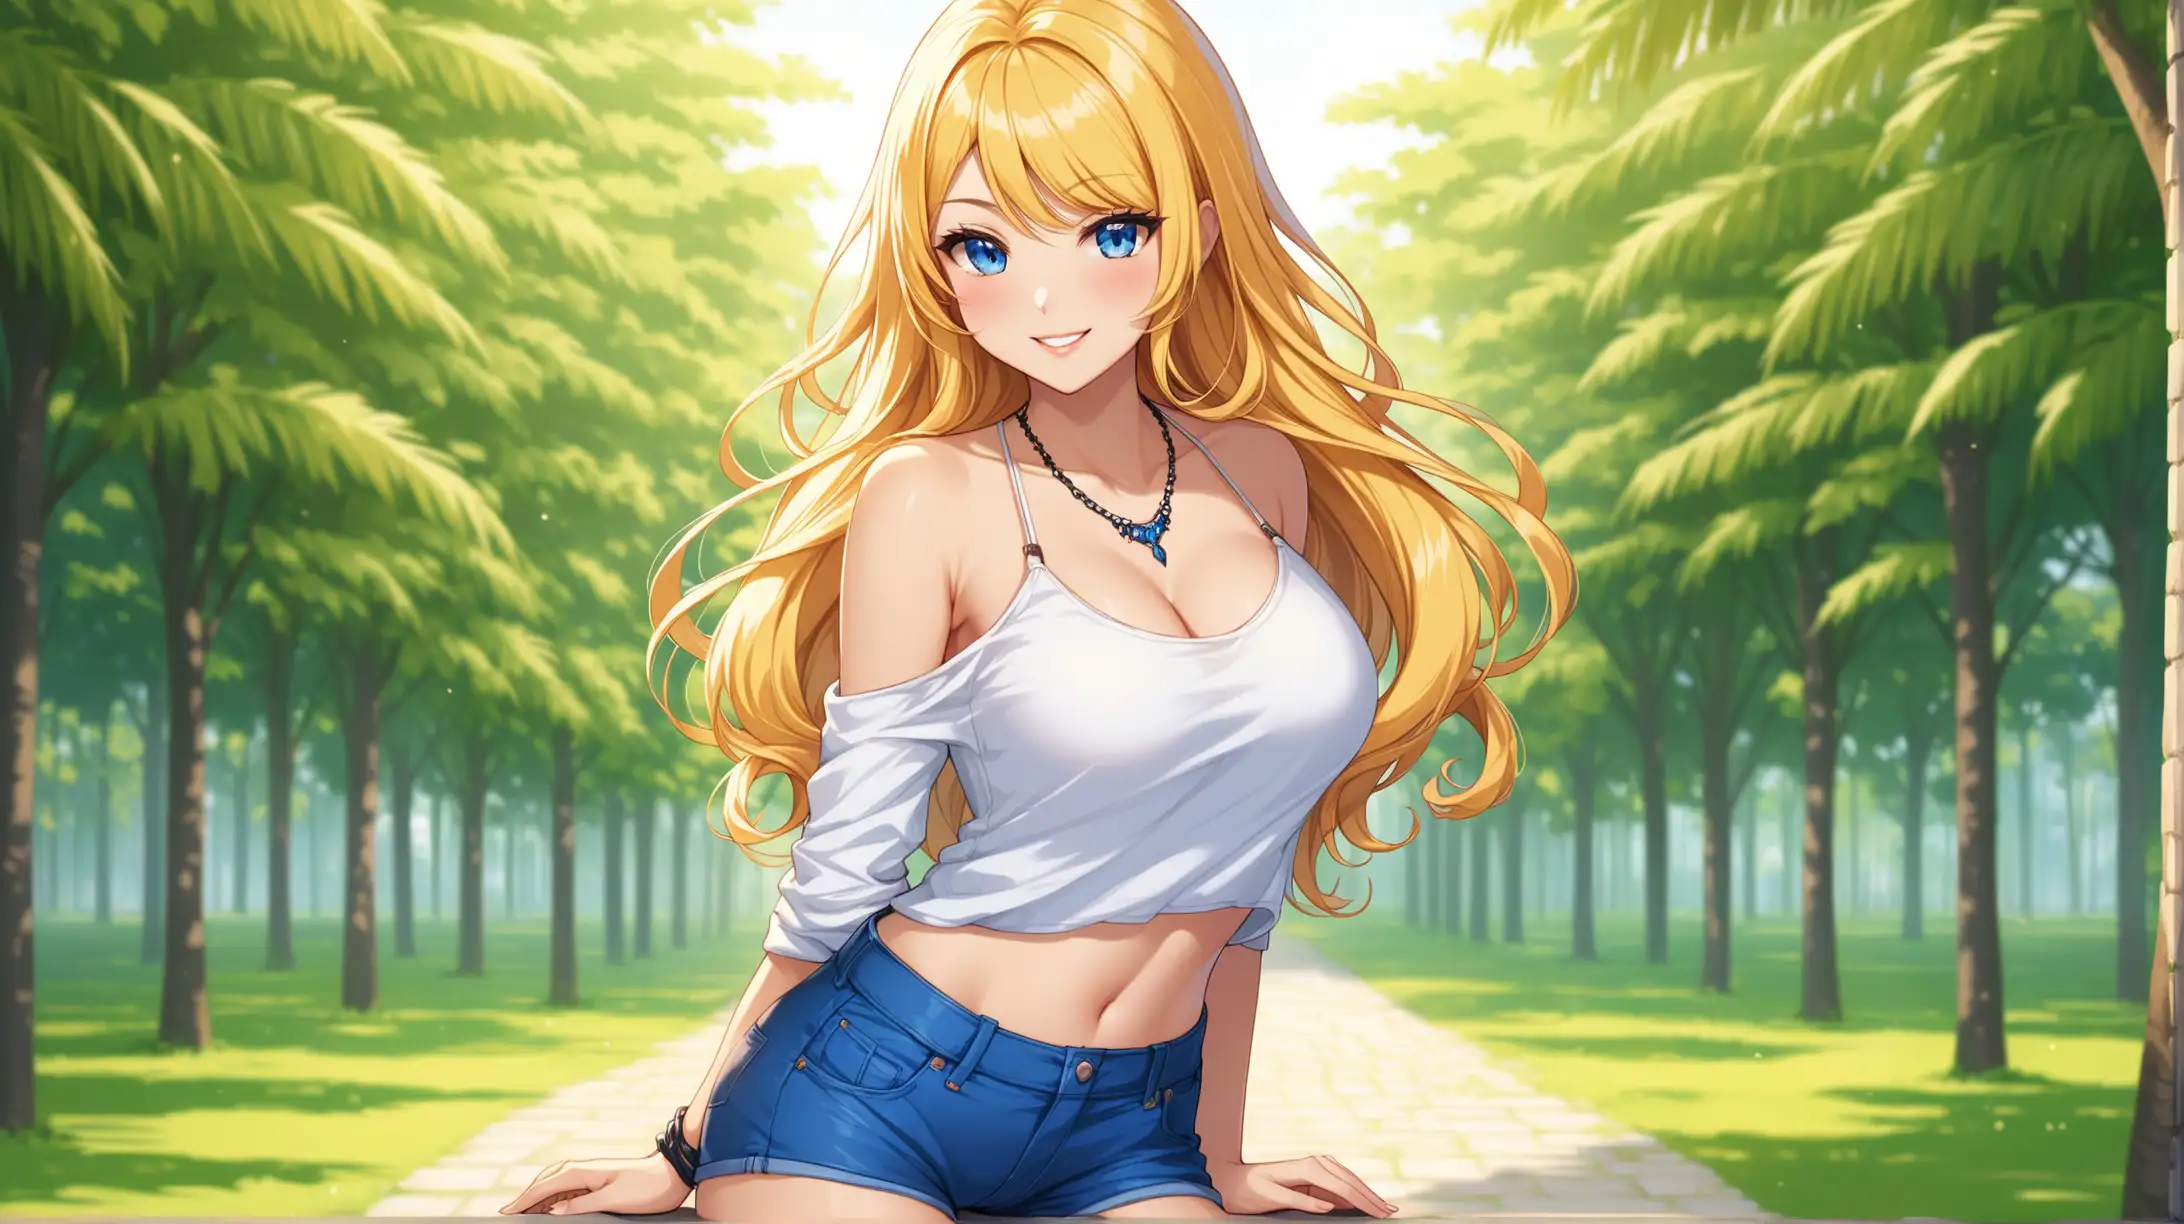 Draw the character Navia, long, blonde, drill hair, blue eyes, high quality, natural lighting, long shot, outdoors, seductive pose, casual outfit, revealing, smiling at the viewer